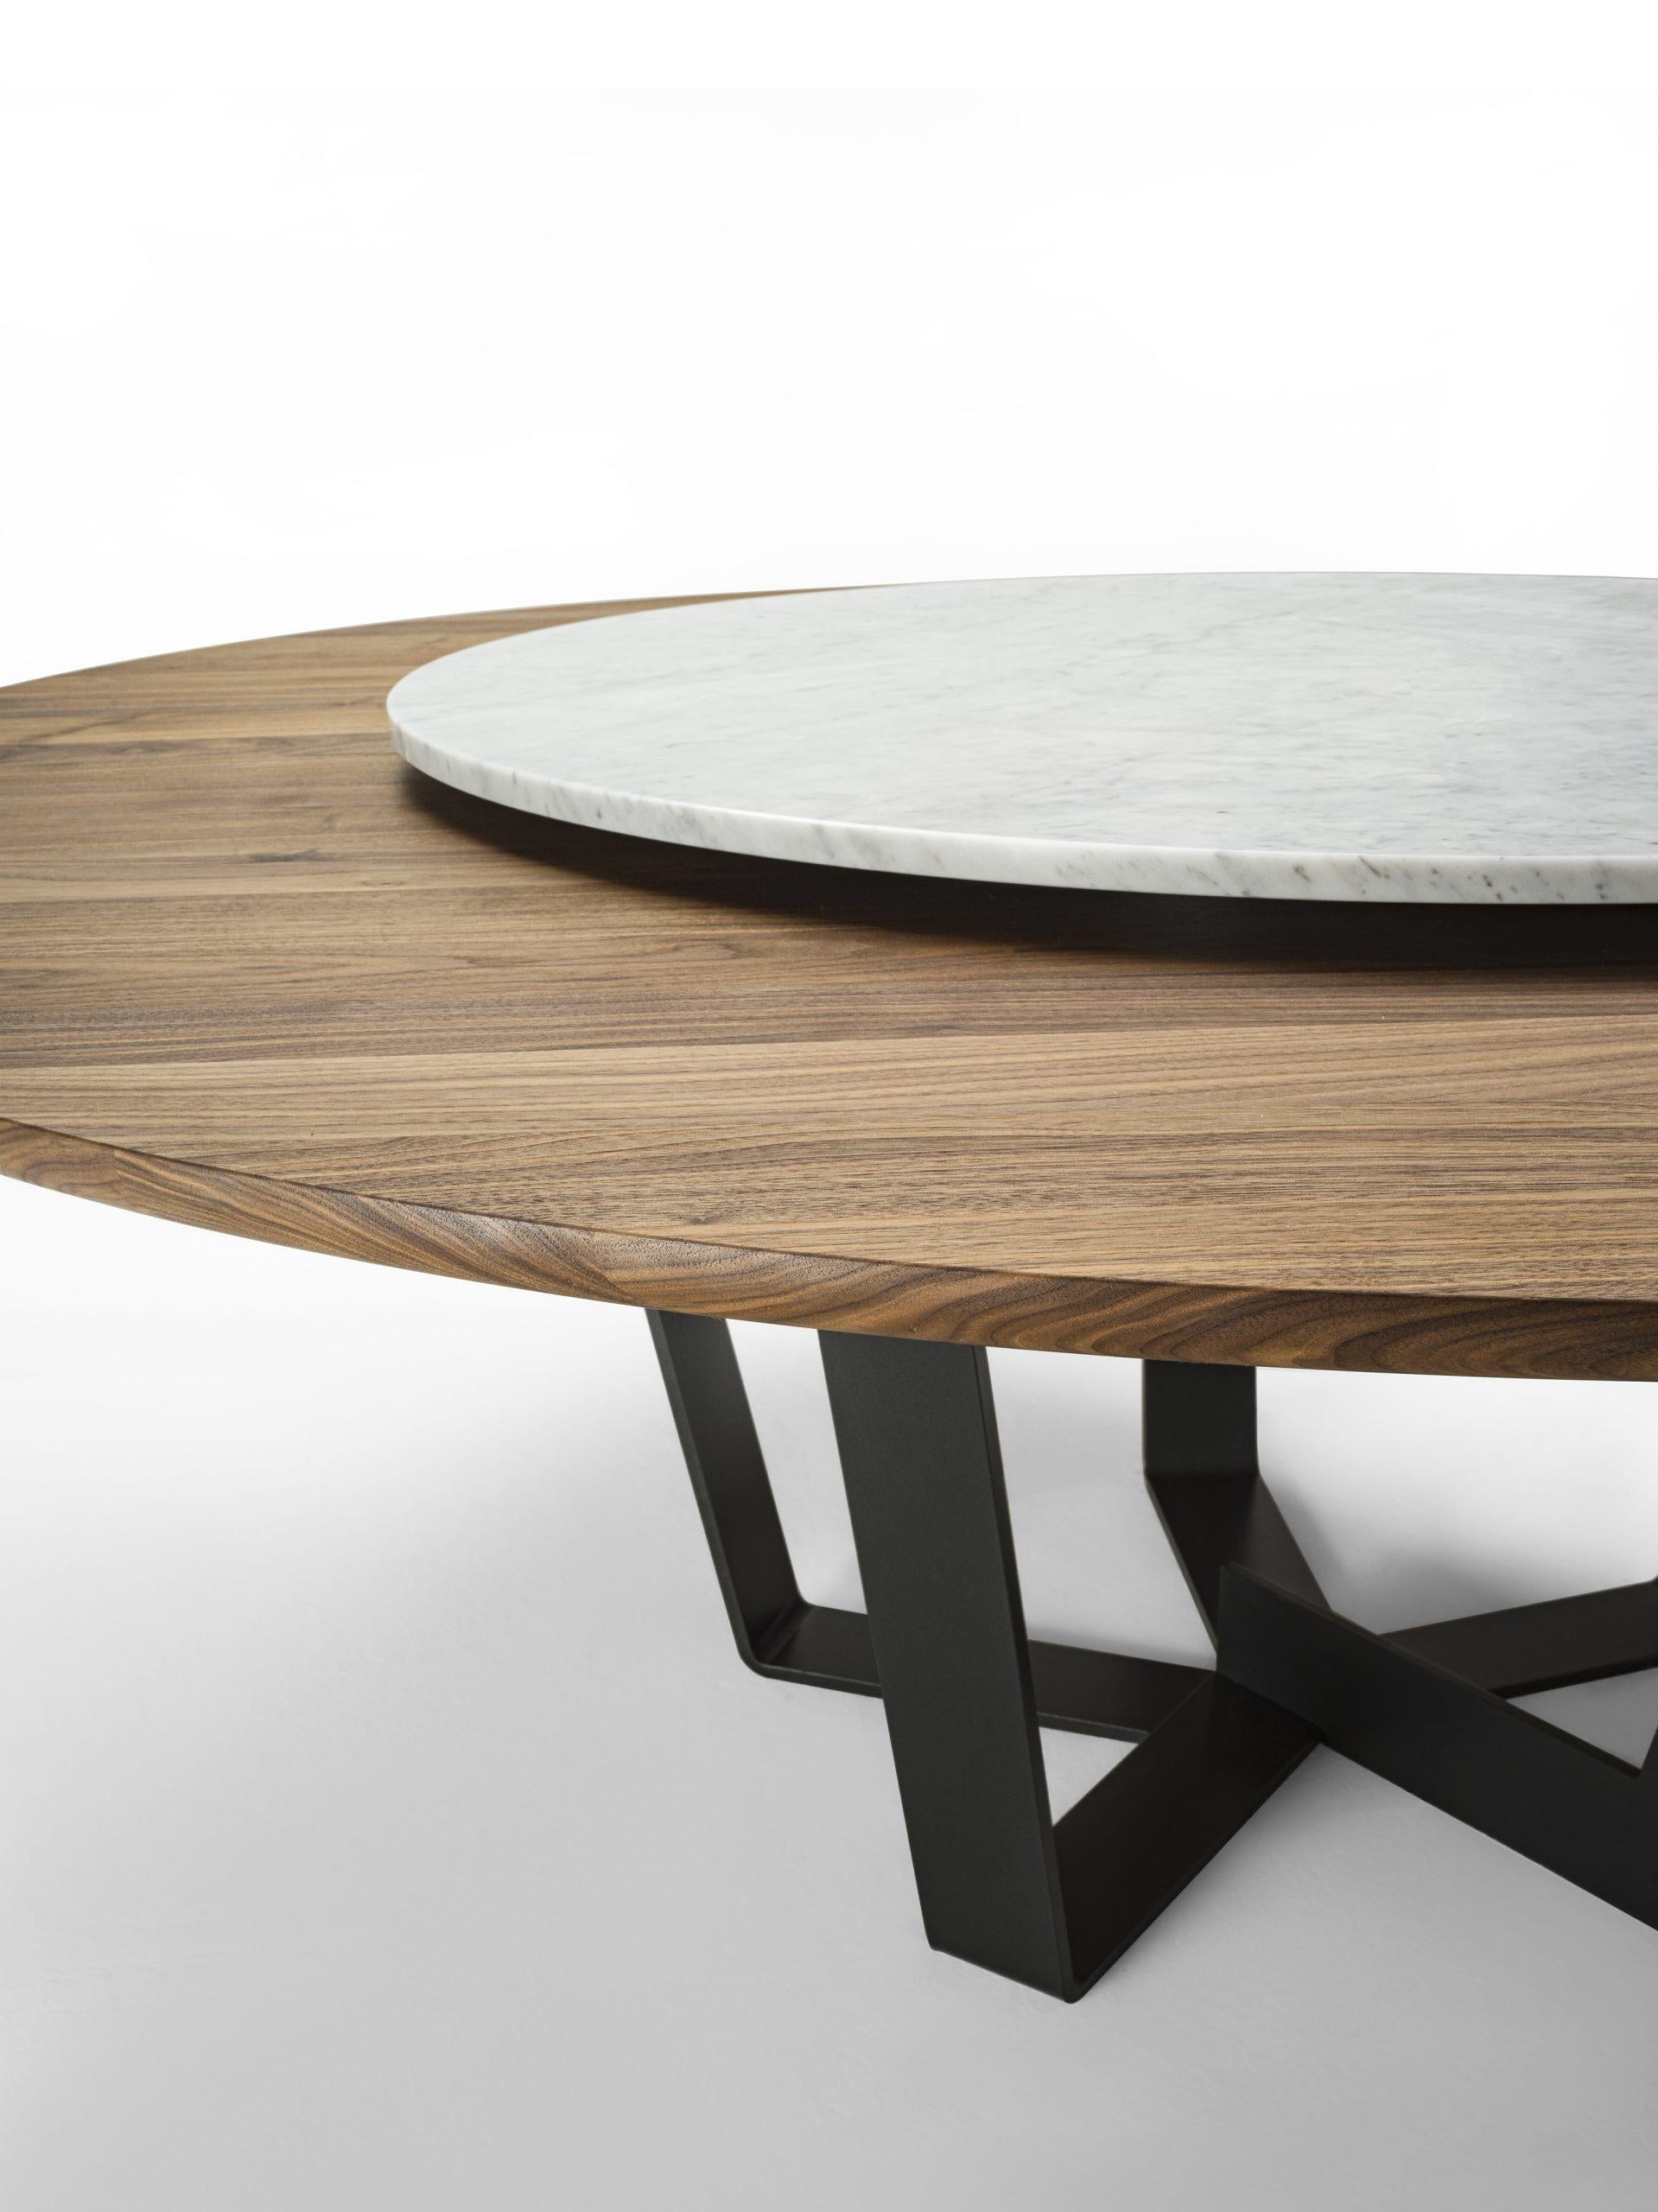 Round table with top in solid walnut with or without knots, equipped with rotating system Lazy Susan in Calacatta marble. The base is in lacquered iron.
Materials and finishes:
Solid Walnut, Calacatta, Iron.
Also avaiable in oak without knots,